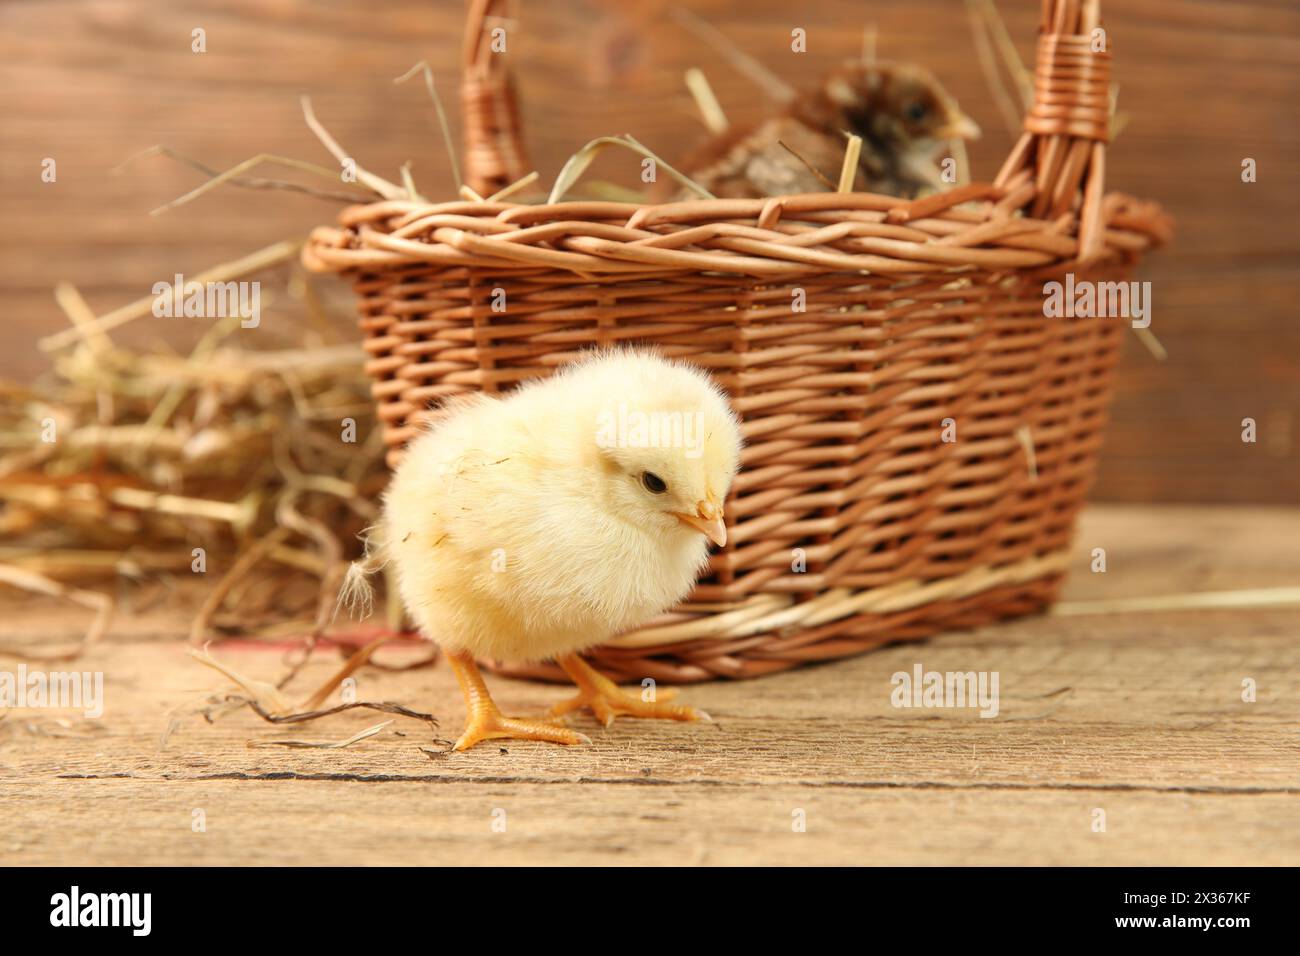 Cute chicks and wicker basket on wooden table. Baby animals Stock Photo